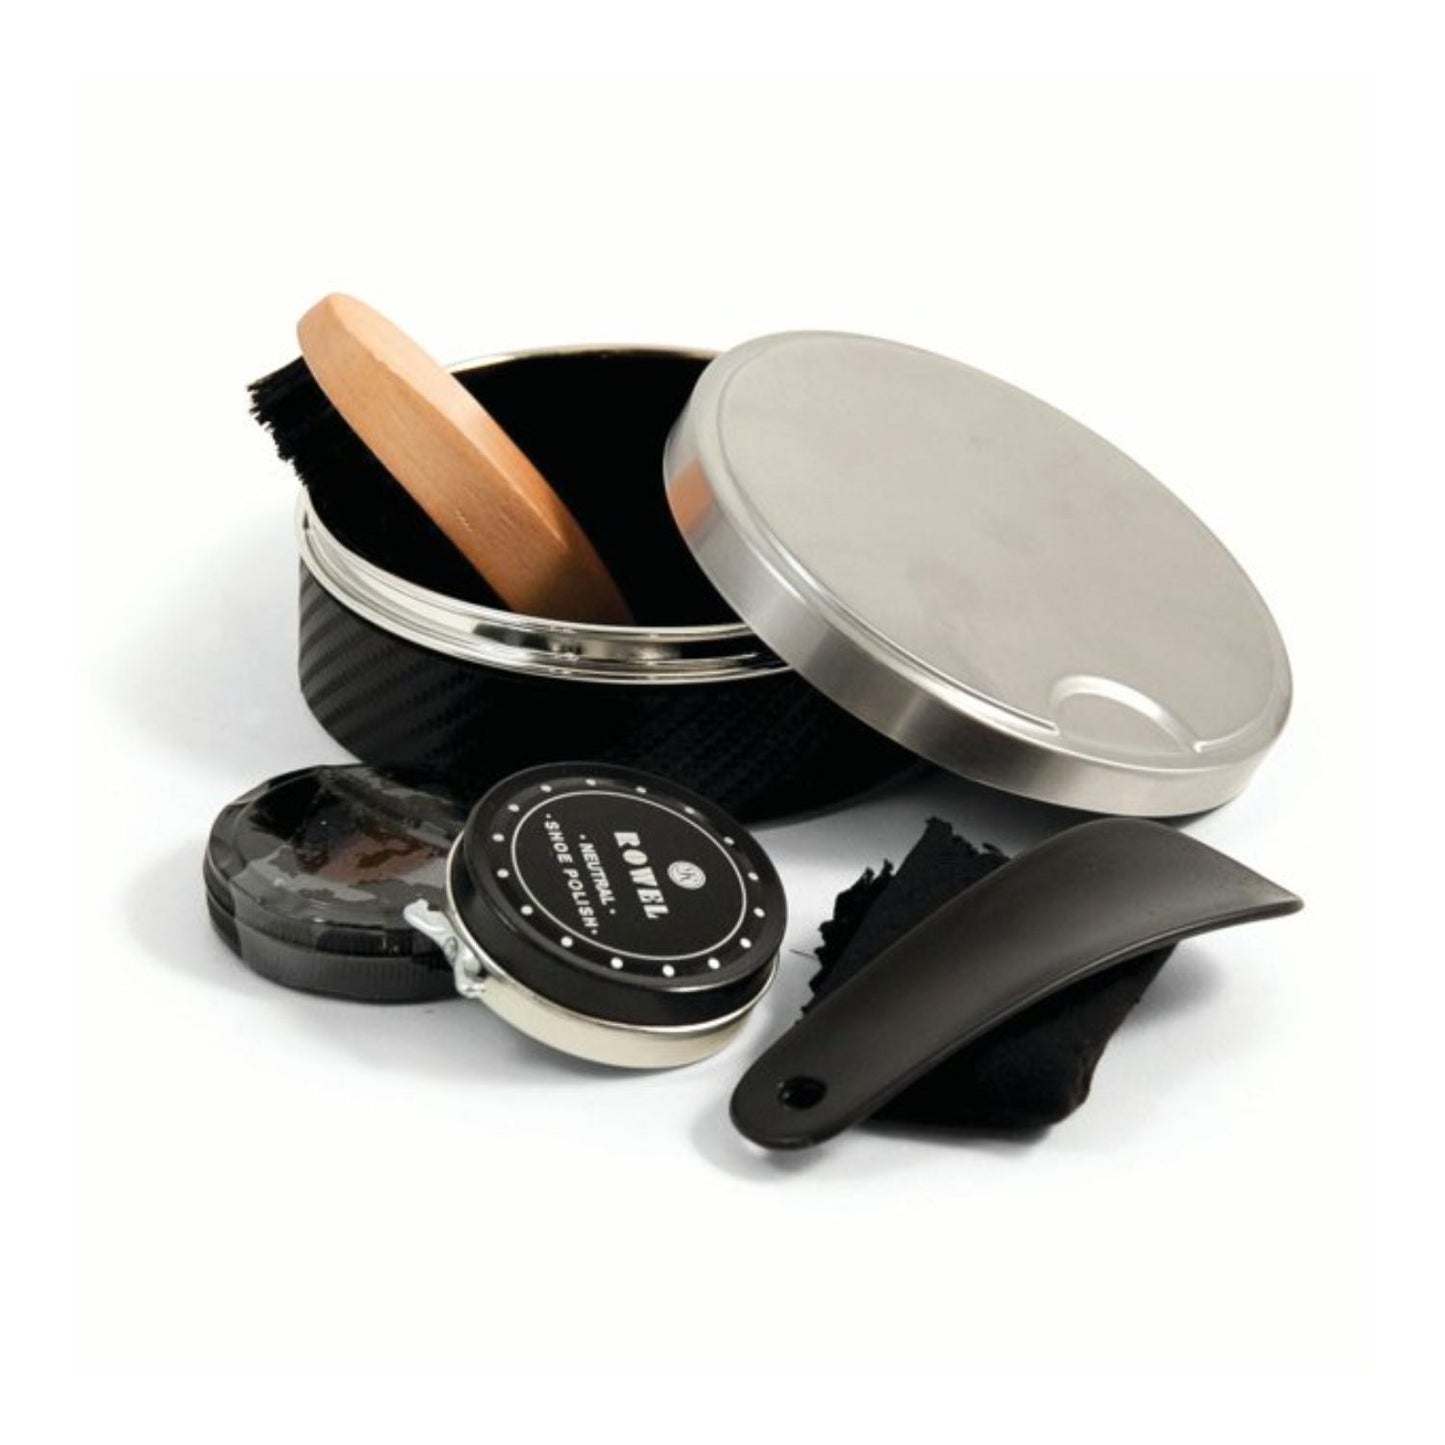 Shoe Shine Set In Stainless Steel & Black Leather Case